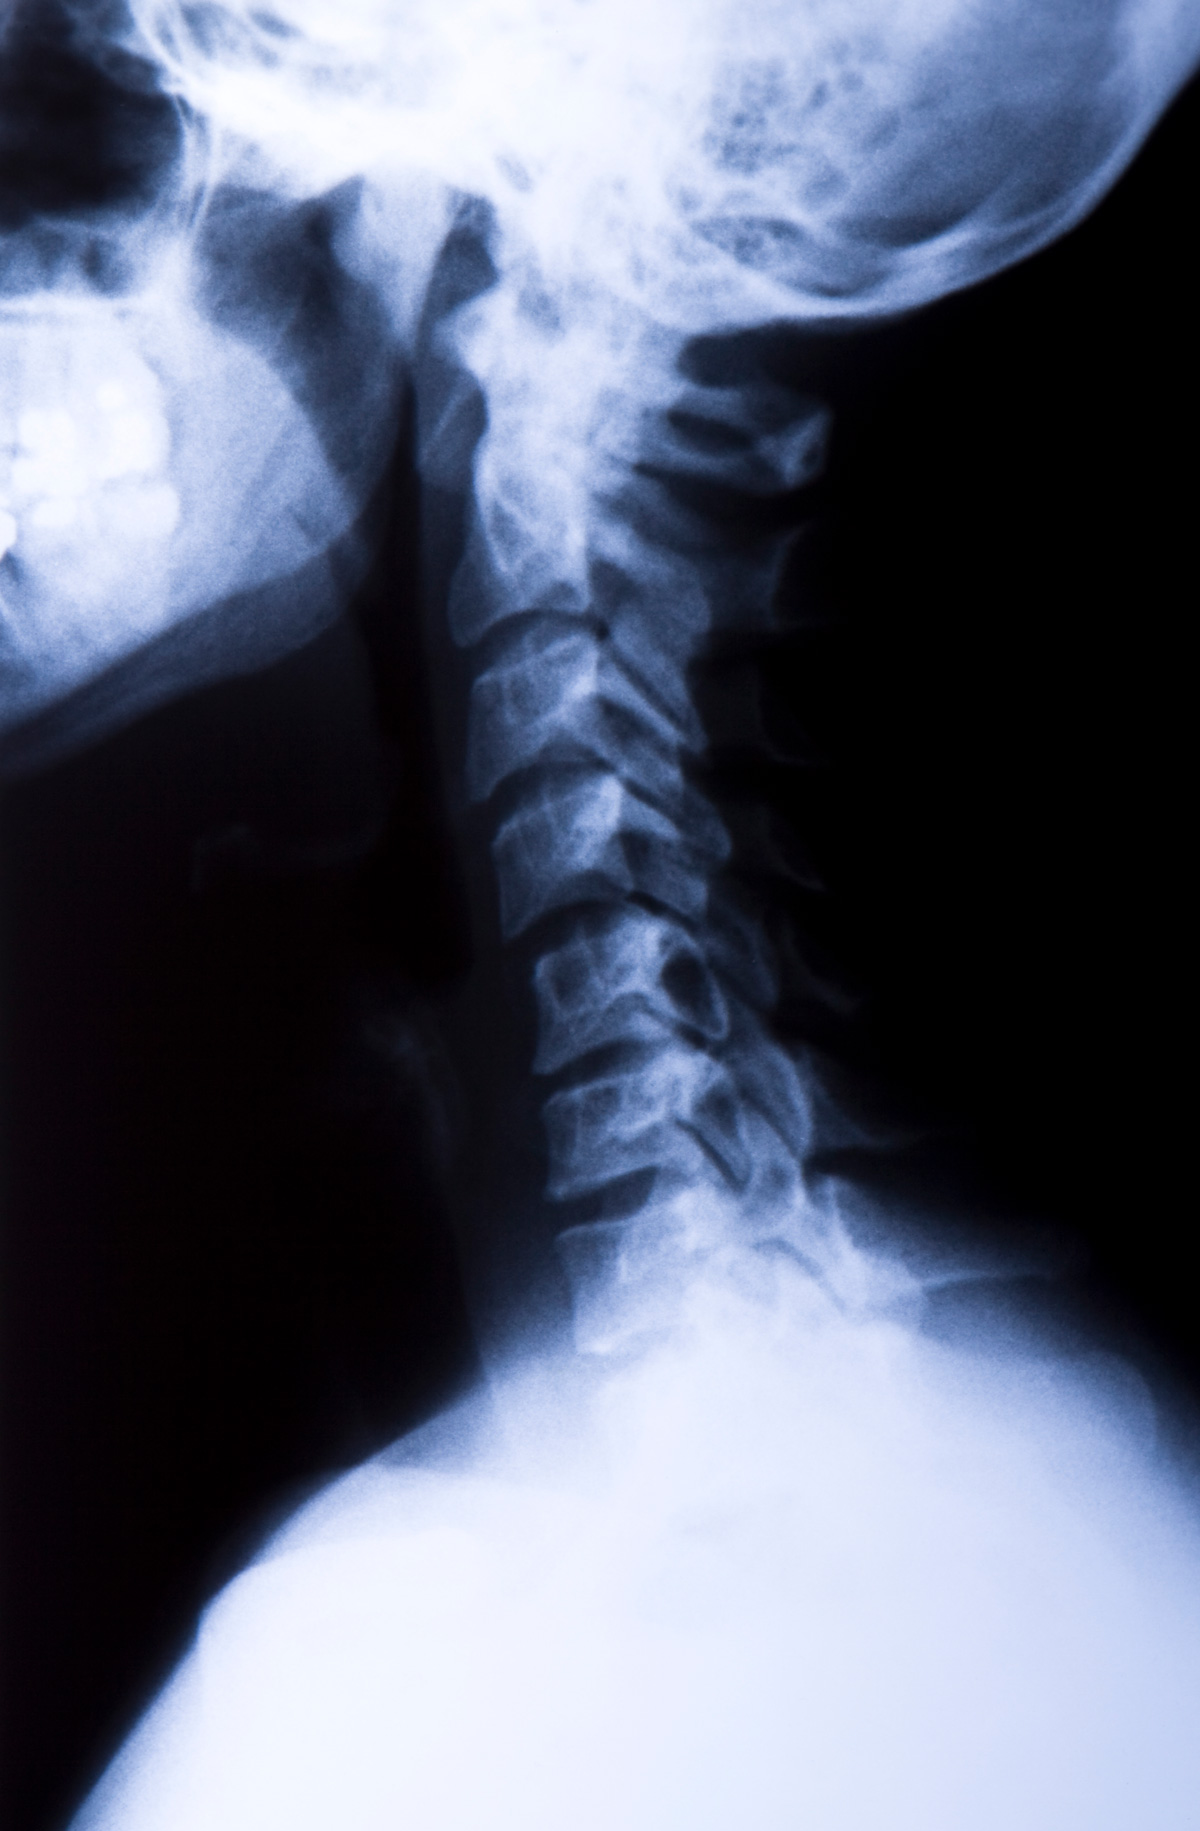 contact sports causing more severe symptoms of neck injuries causing limited range of motion